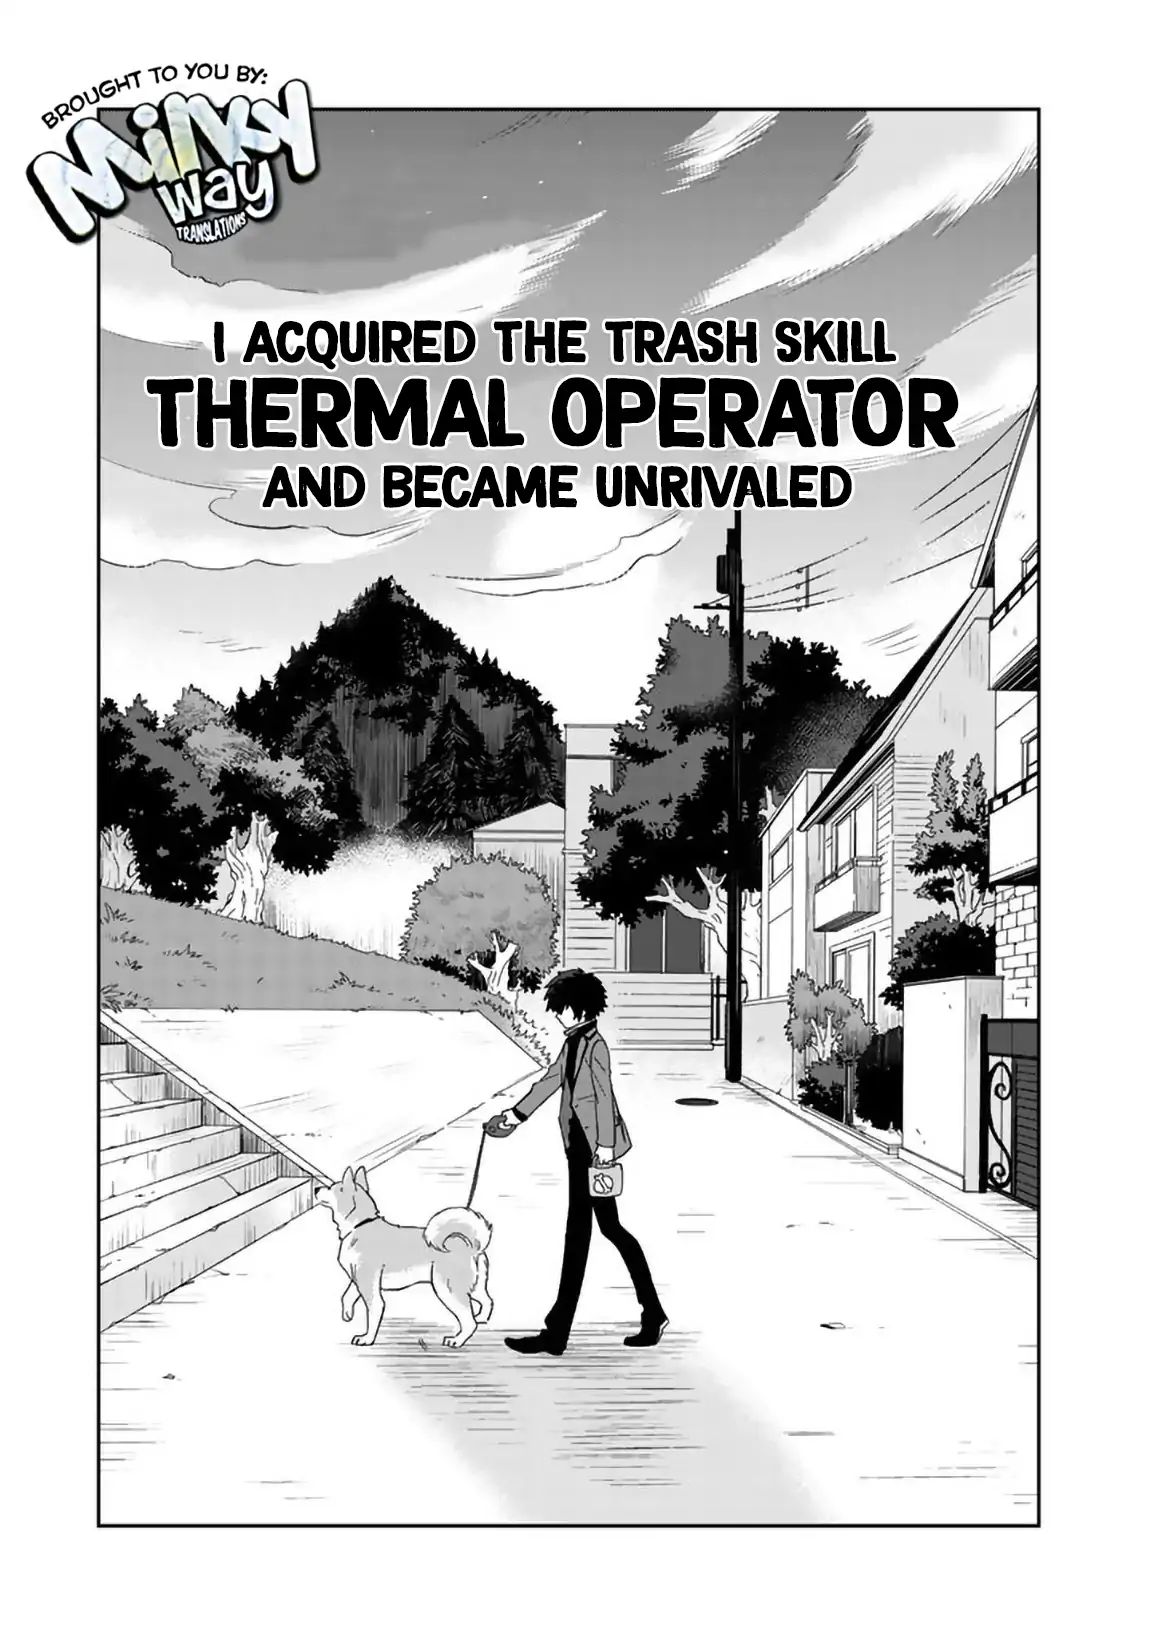 I, Who Possessed A Trash Skill 【Thermal Operator】, Became Unrivaled. Chapter 6